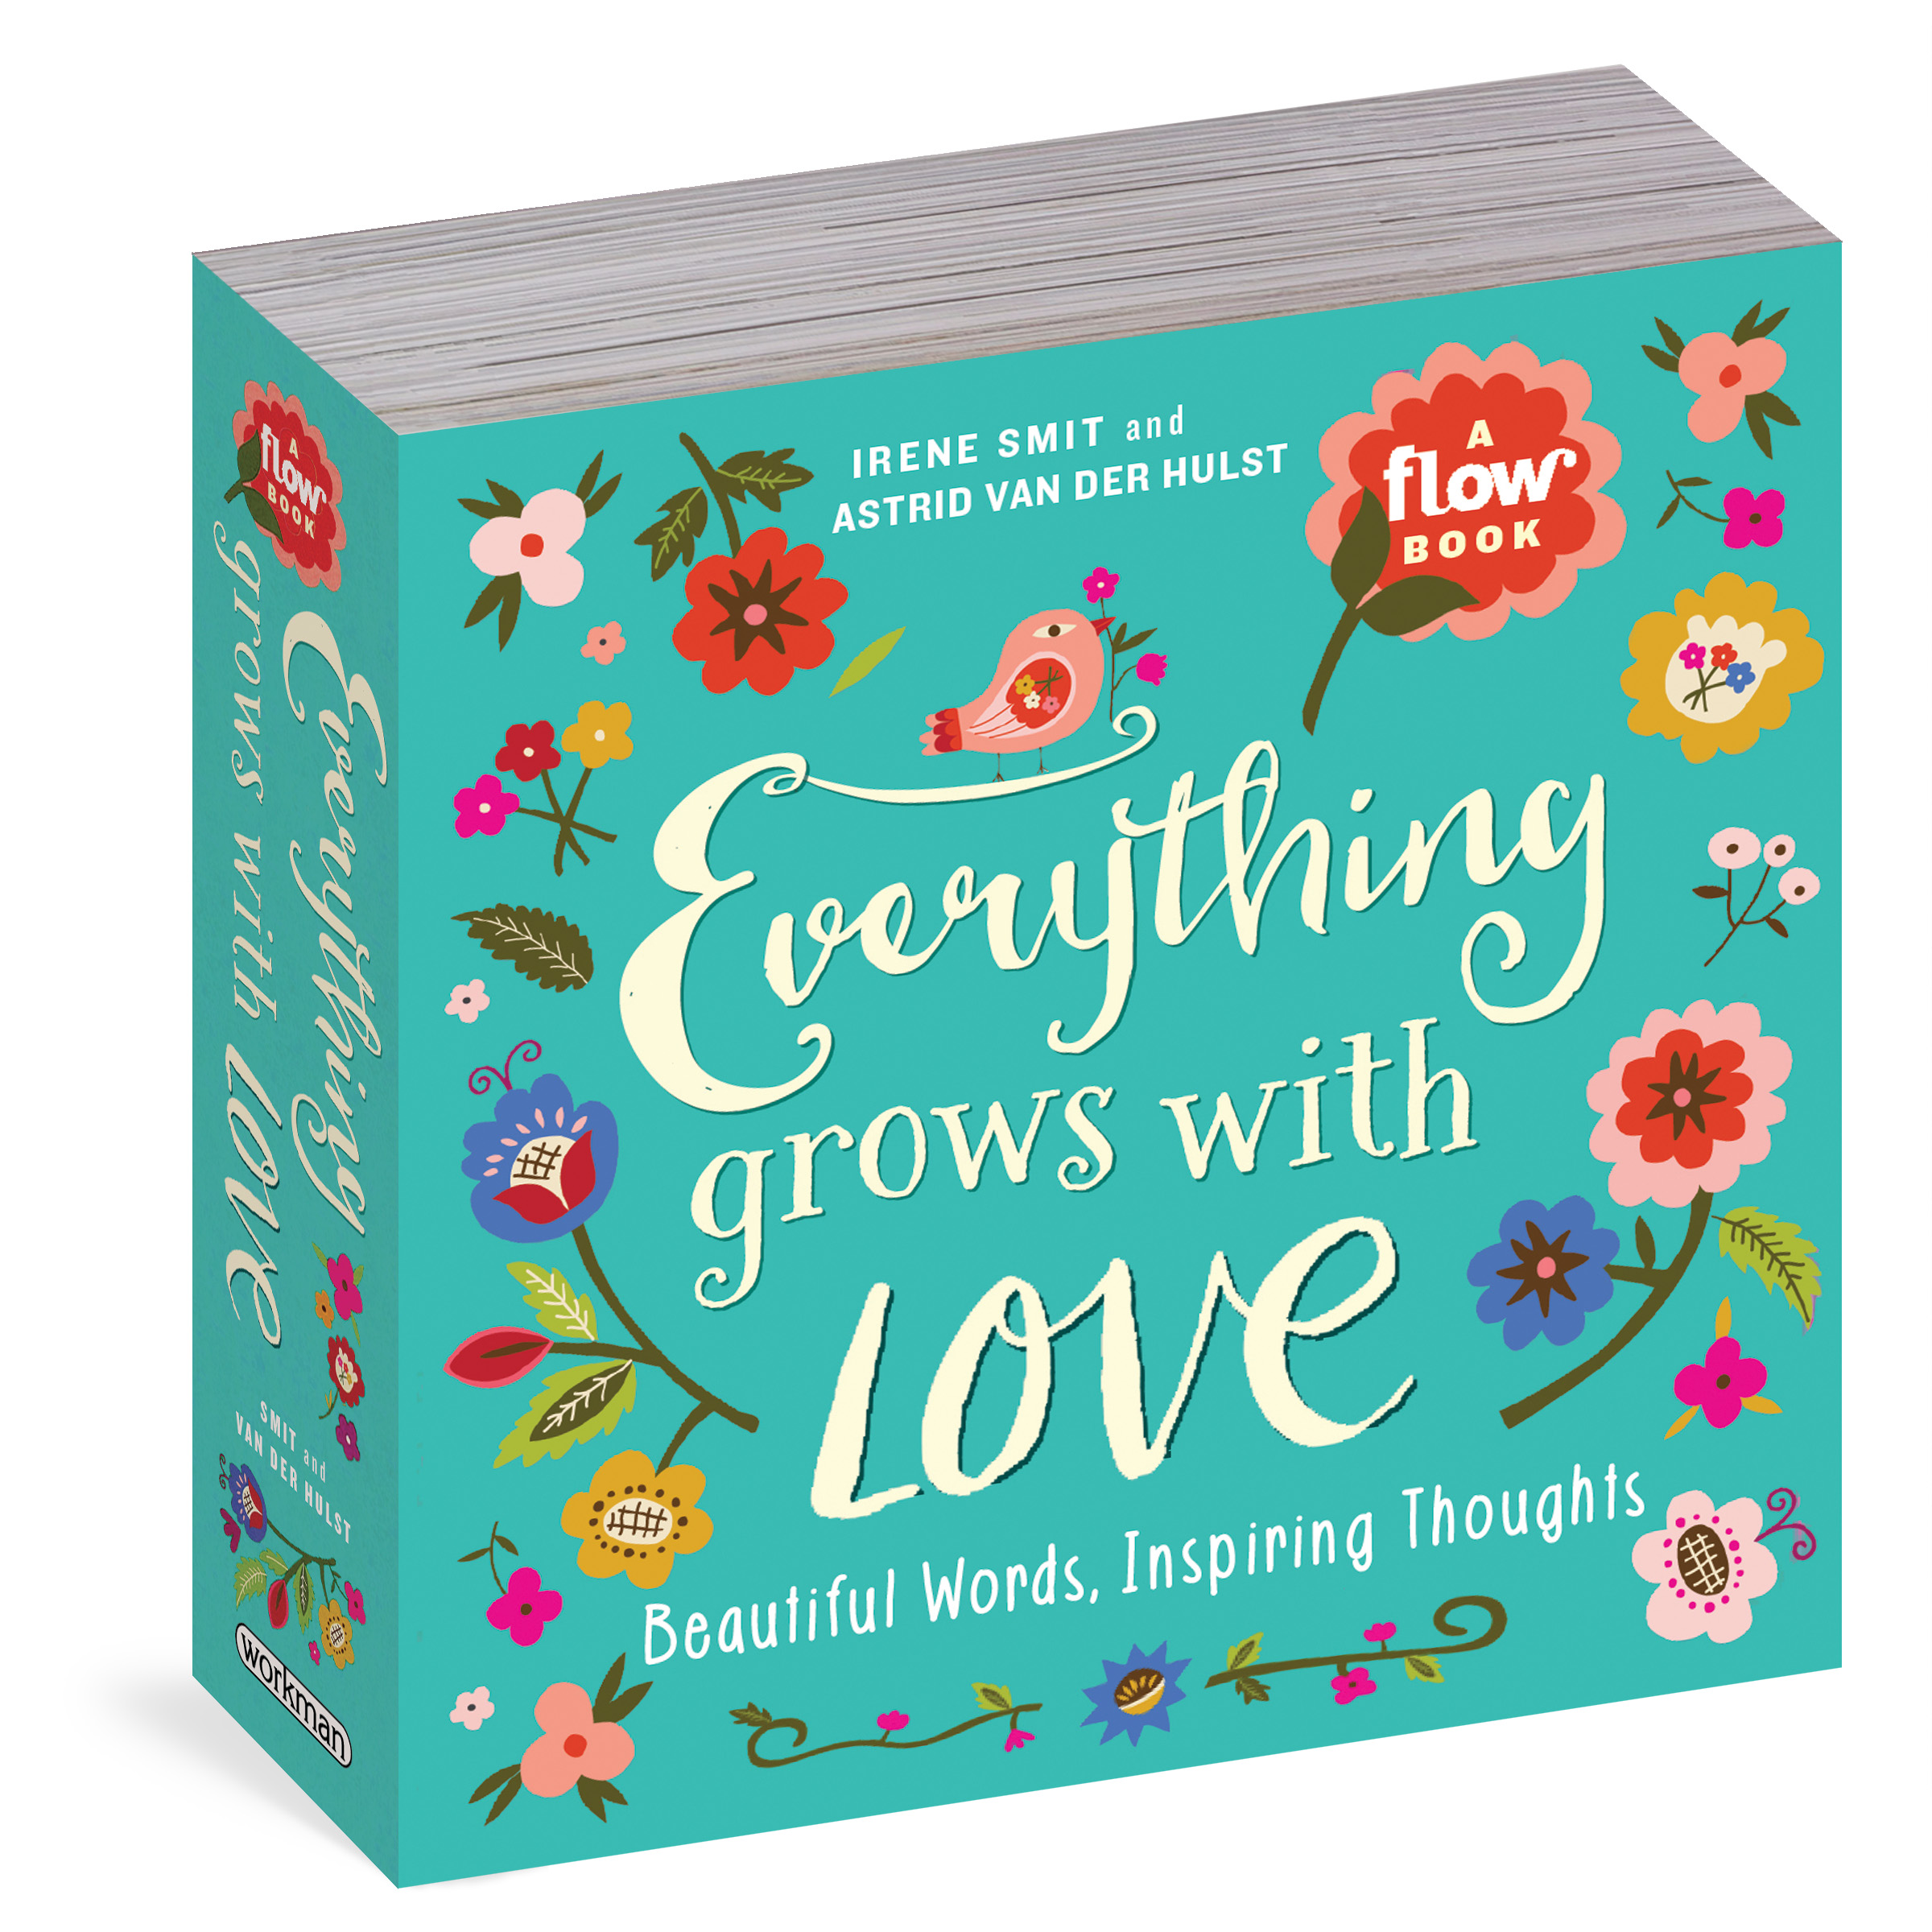 Everything grows with love